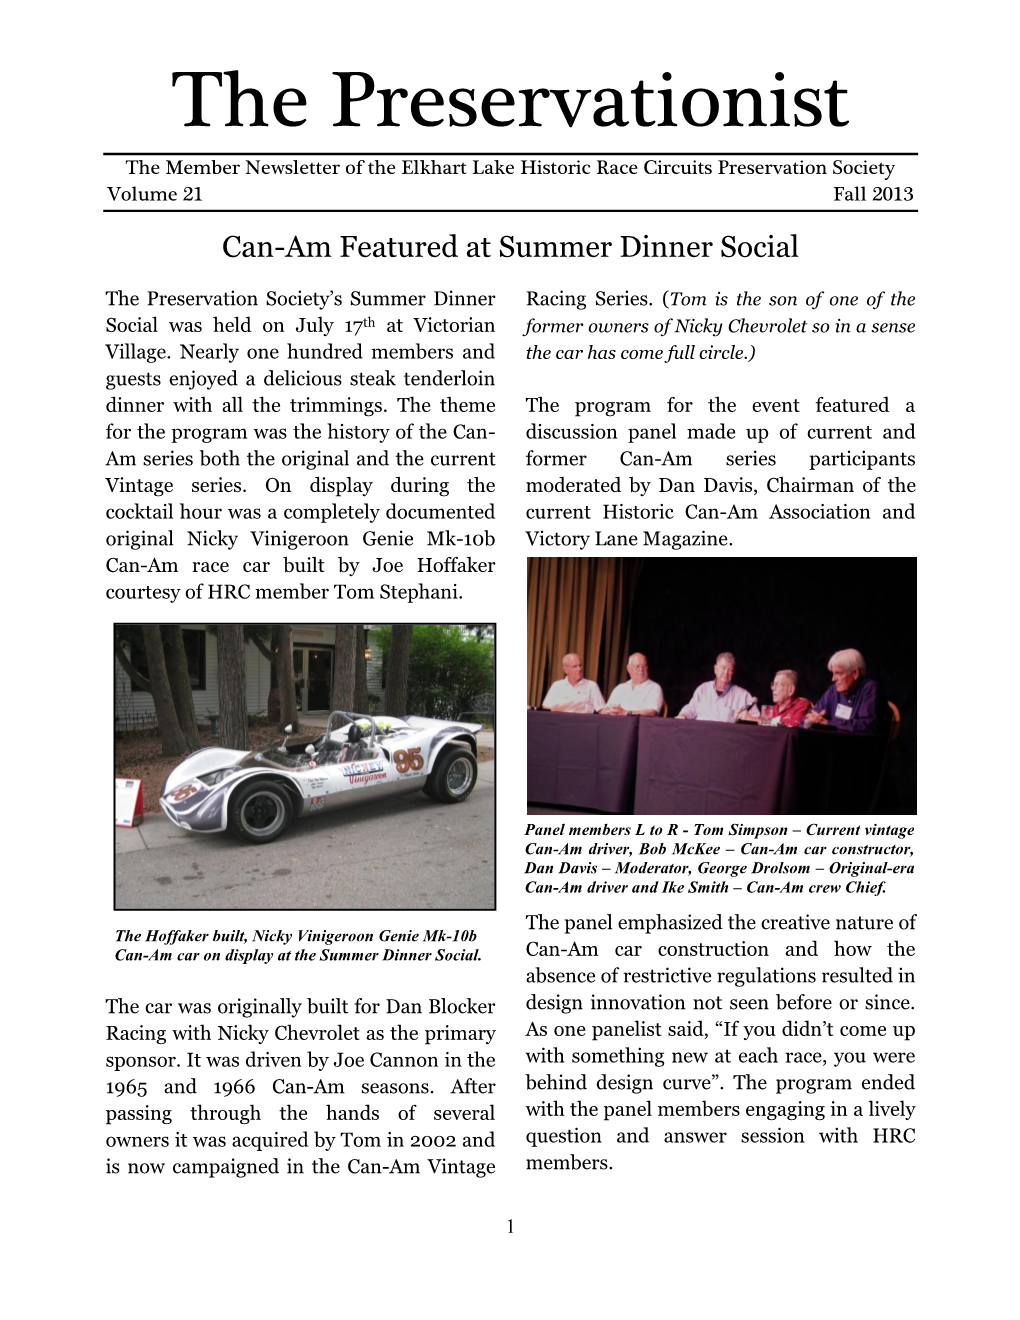 The Preservationist the Member Newsletter of the Elkhart Lake Historic Race Circuits Preservation Society Volume 21 Fall 2013